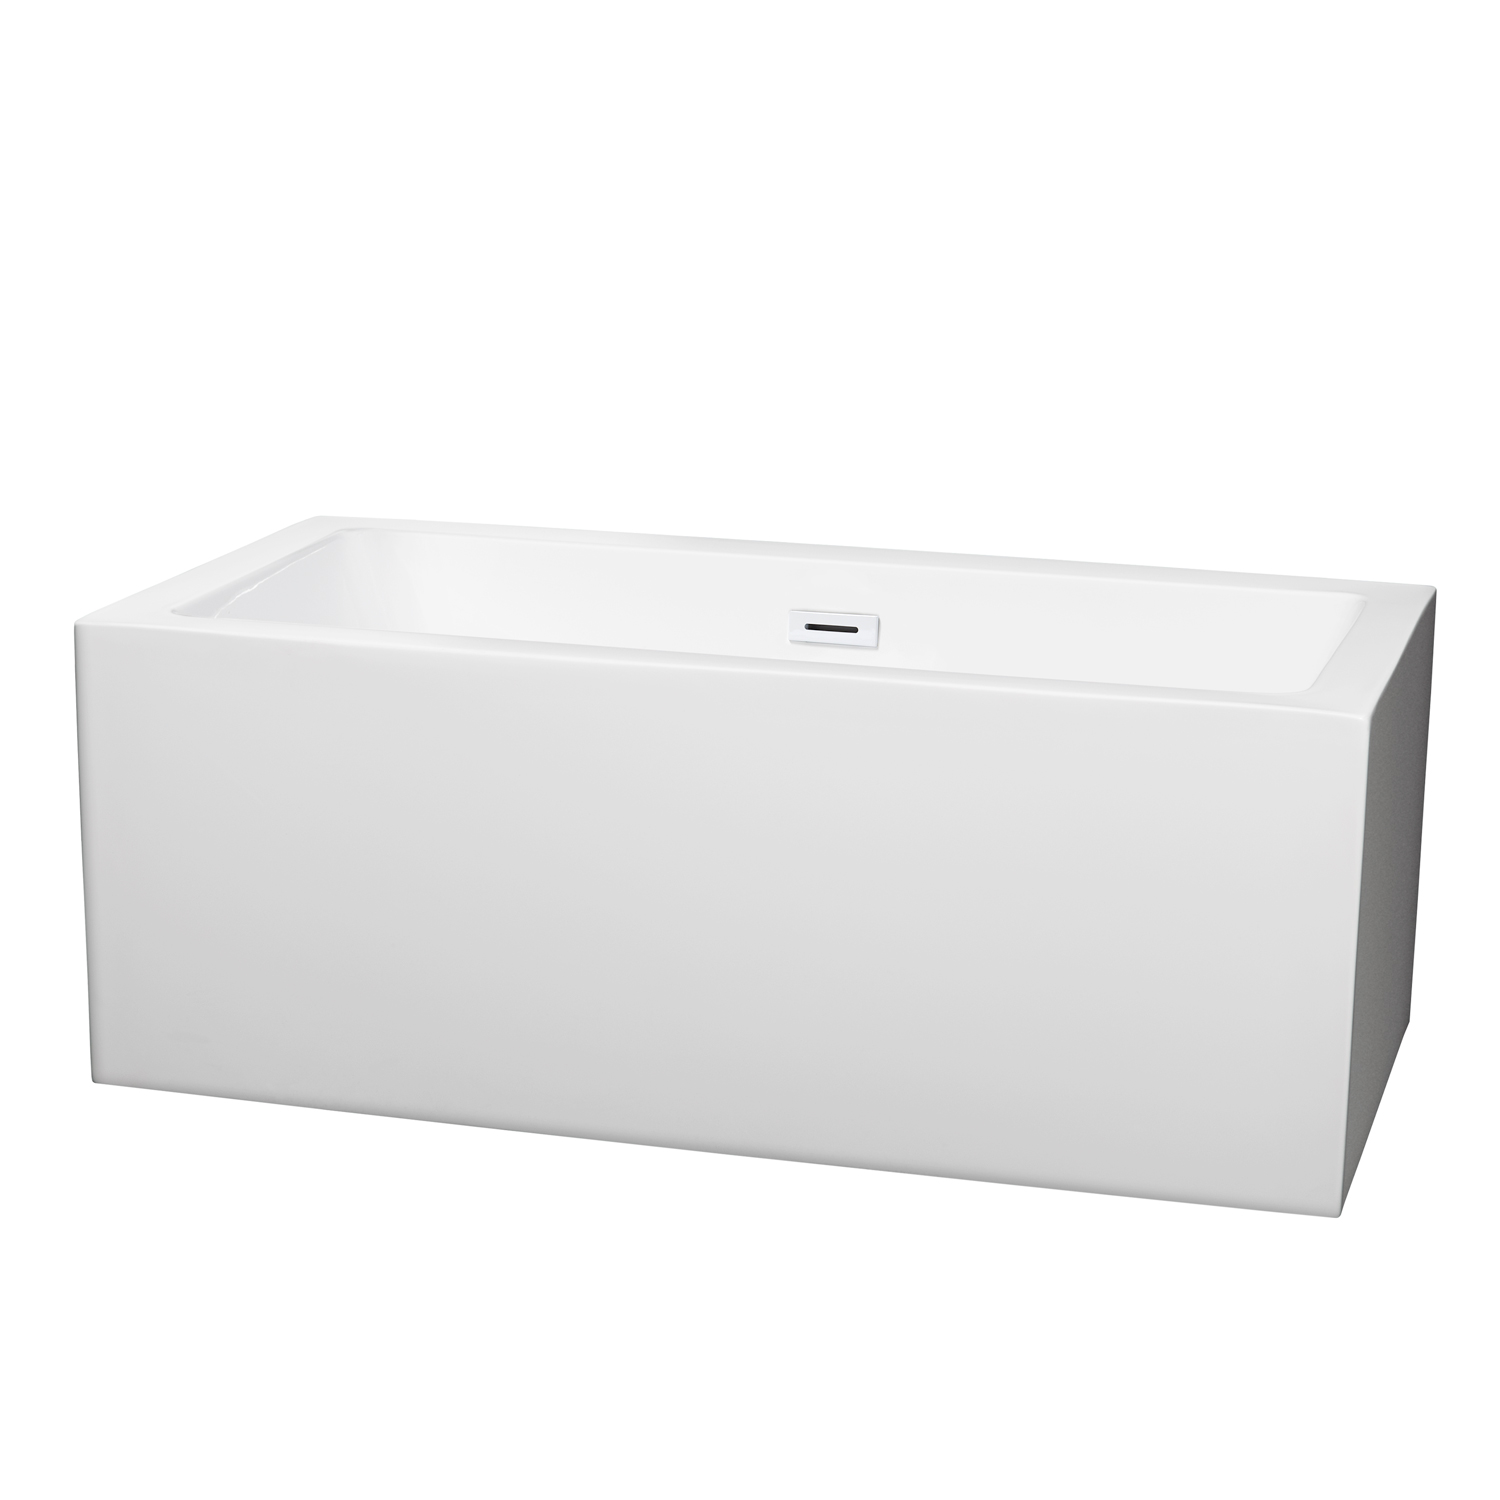 60" Freestanding Bathtub in White with Shiny White Pop-up Drain and Overflow Trim Finish